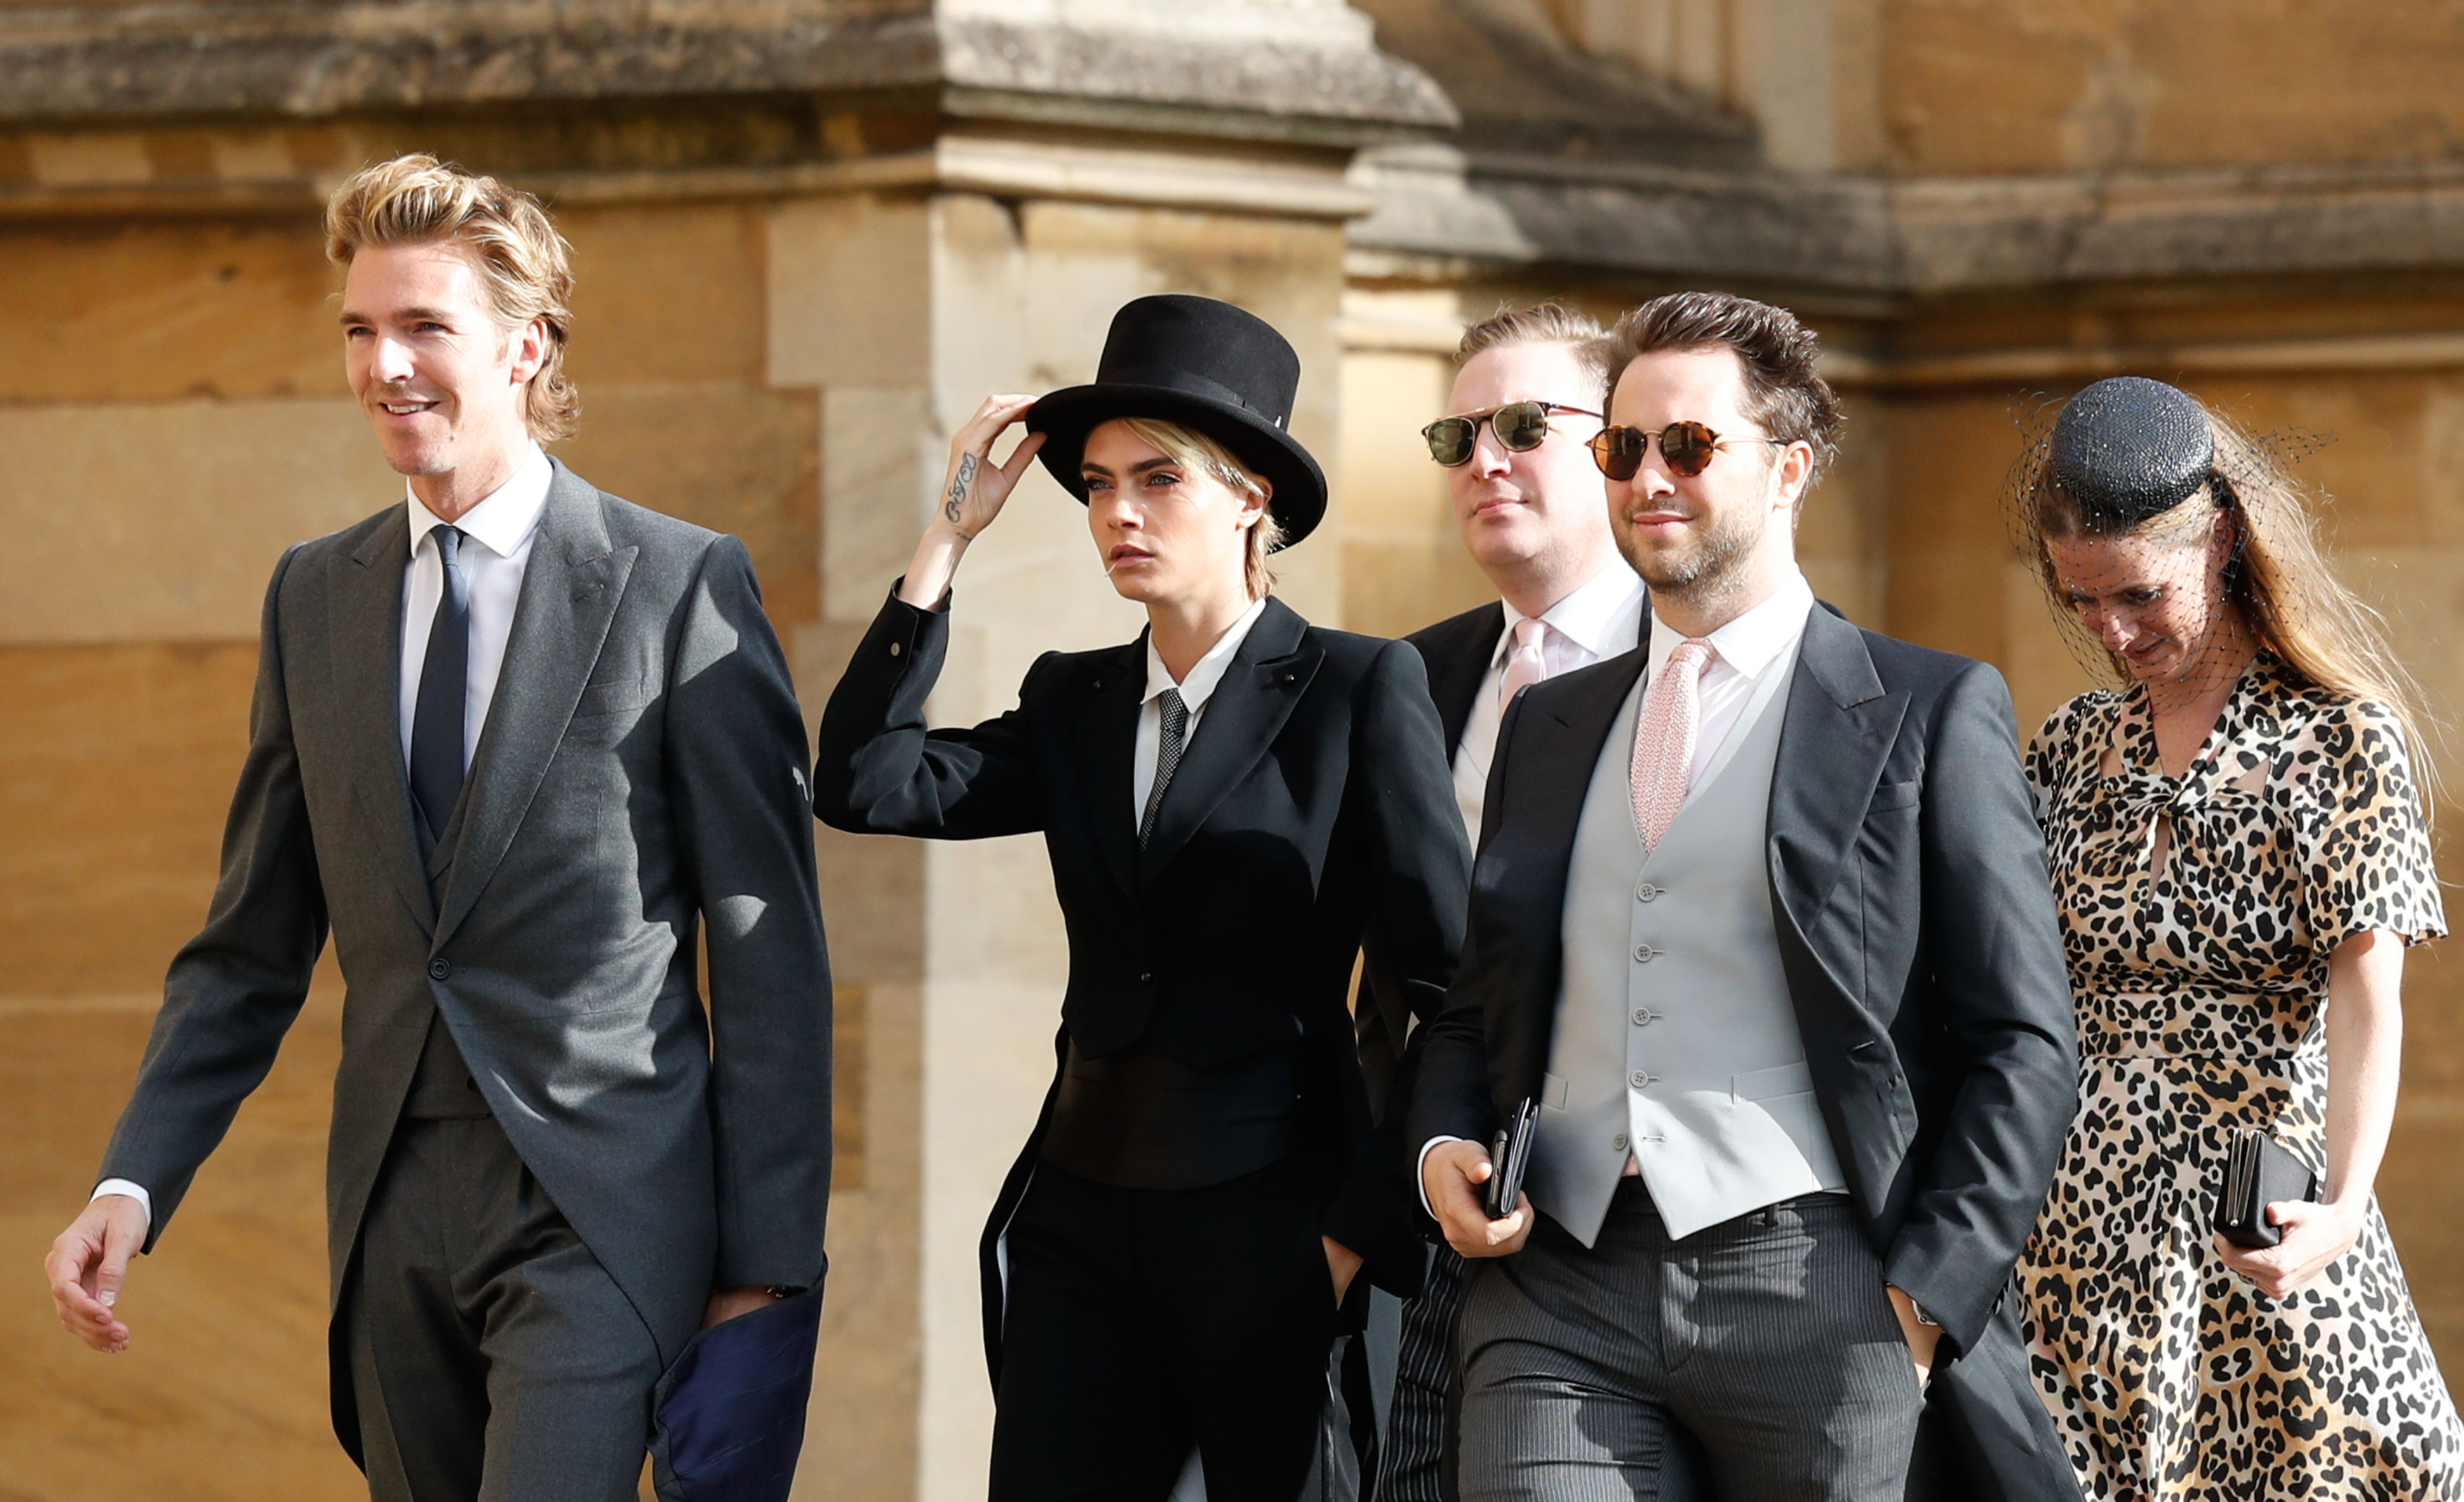 Cara Delevingne Somehow Pulls Off A Top Hat In Divine Royal Wedding Look